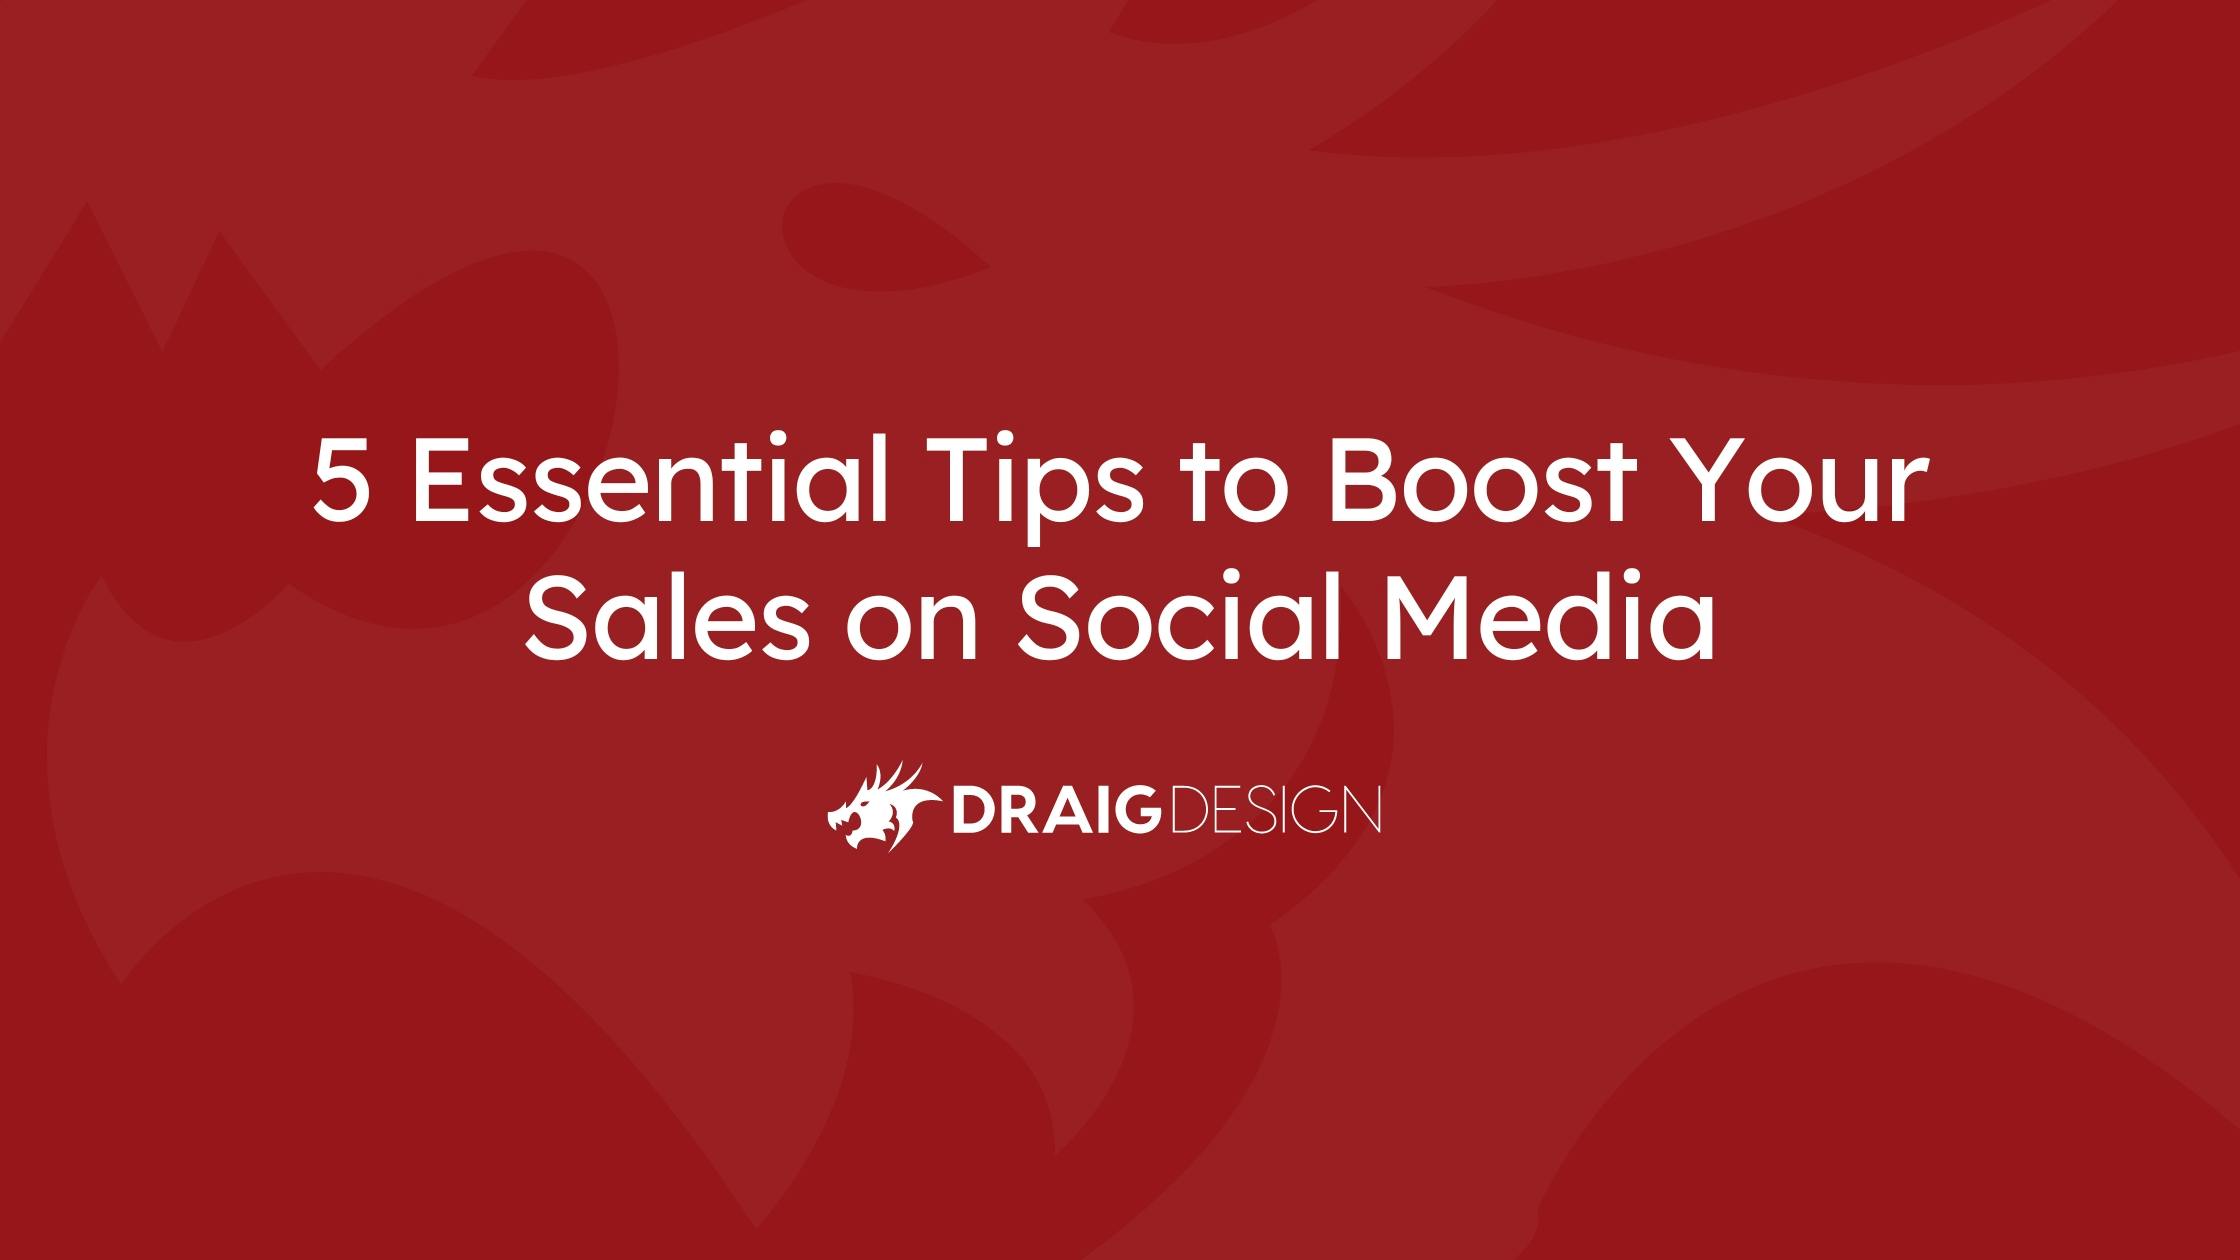 5 Essential Tips to Boost Your Sales on Social Media